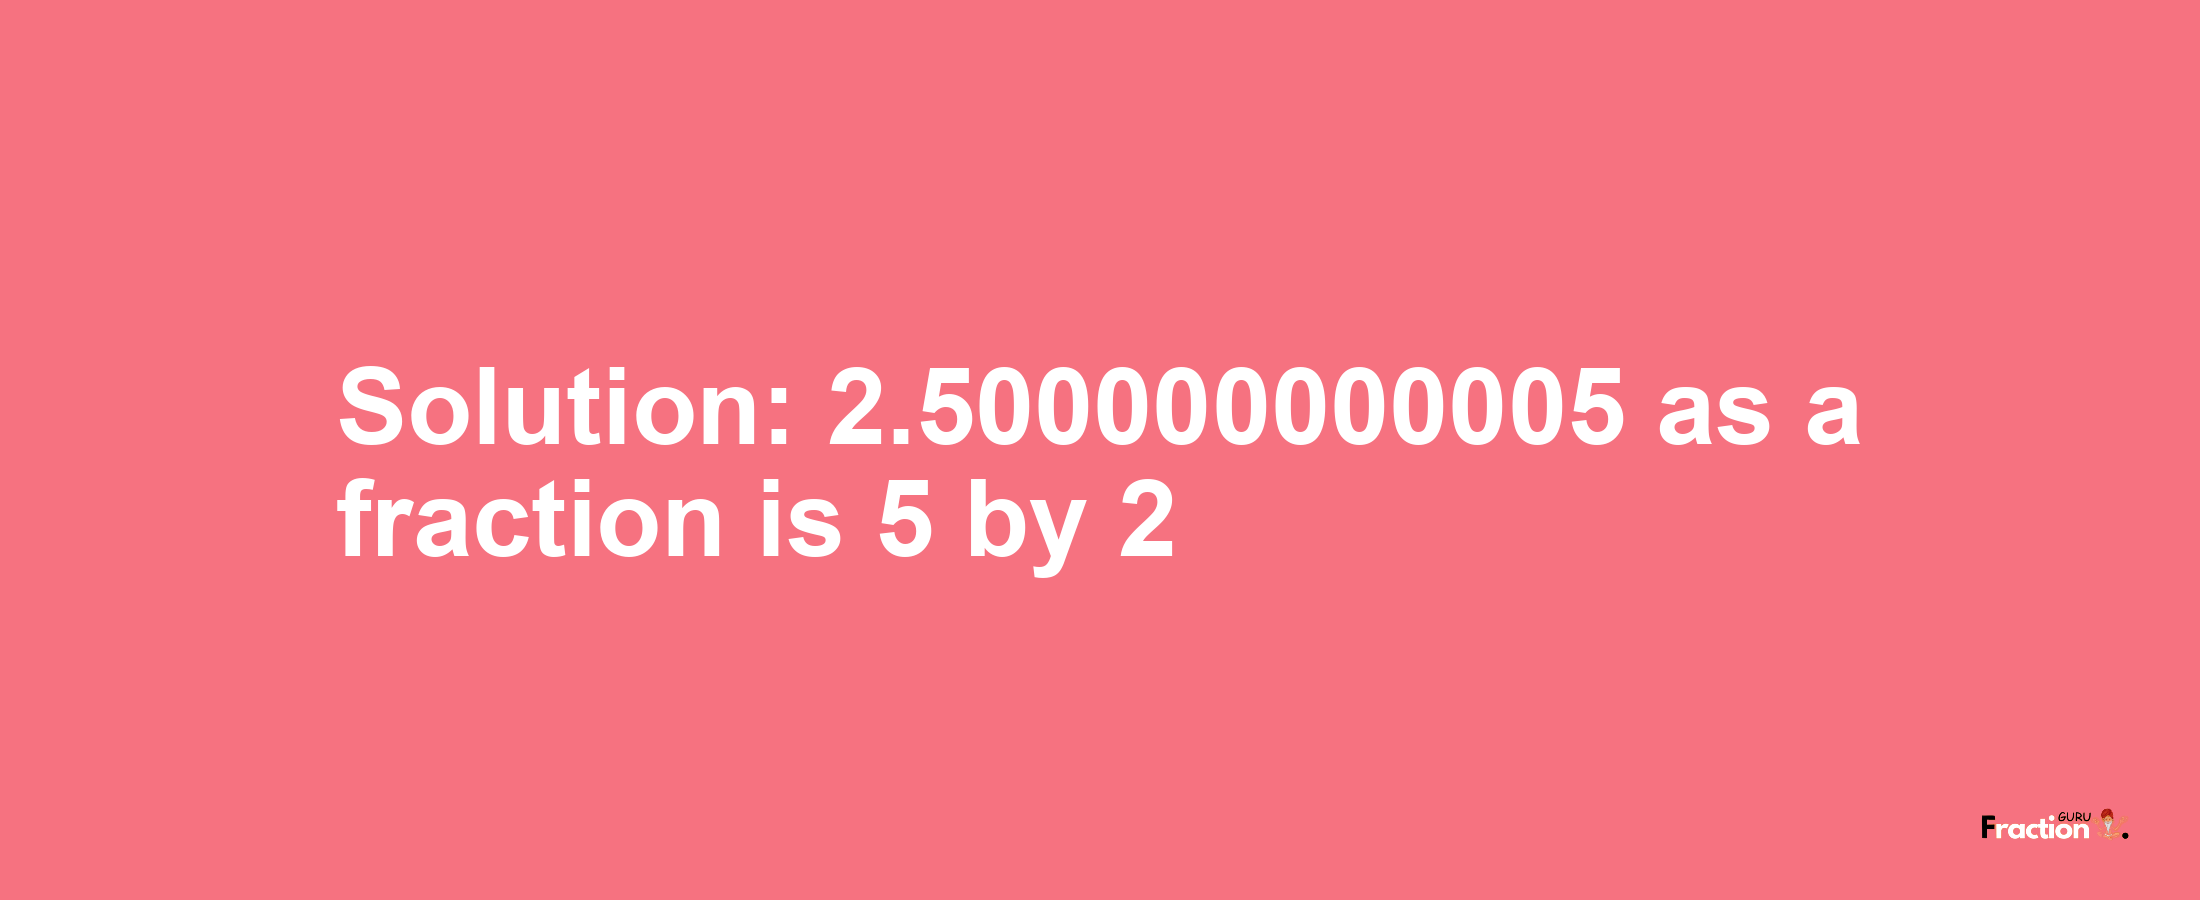 Solution:2.500000000005 as a fraction is 5/2